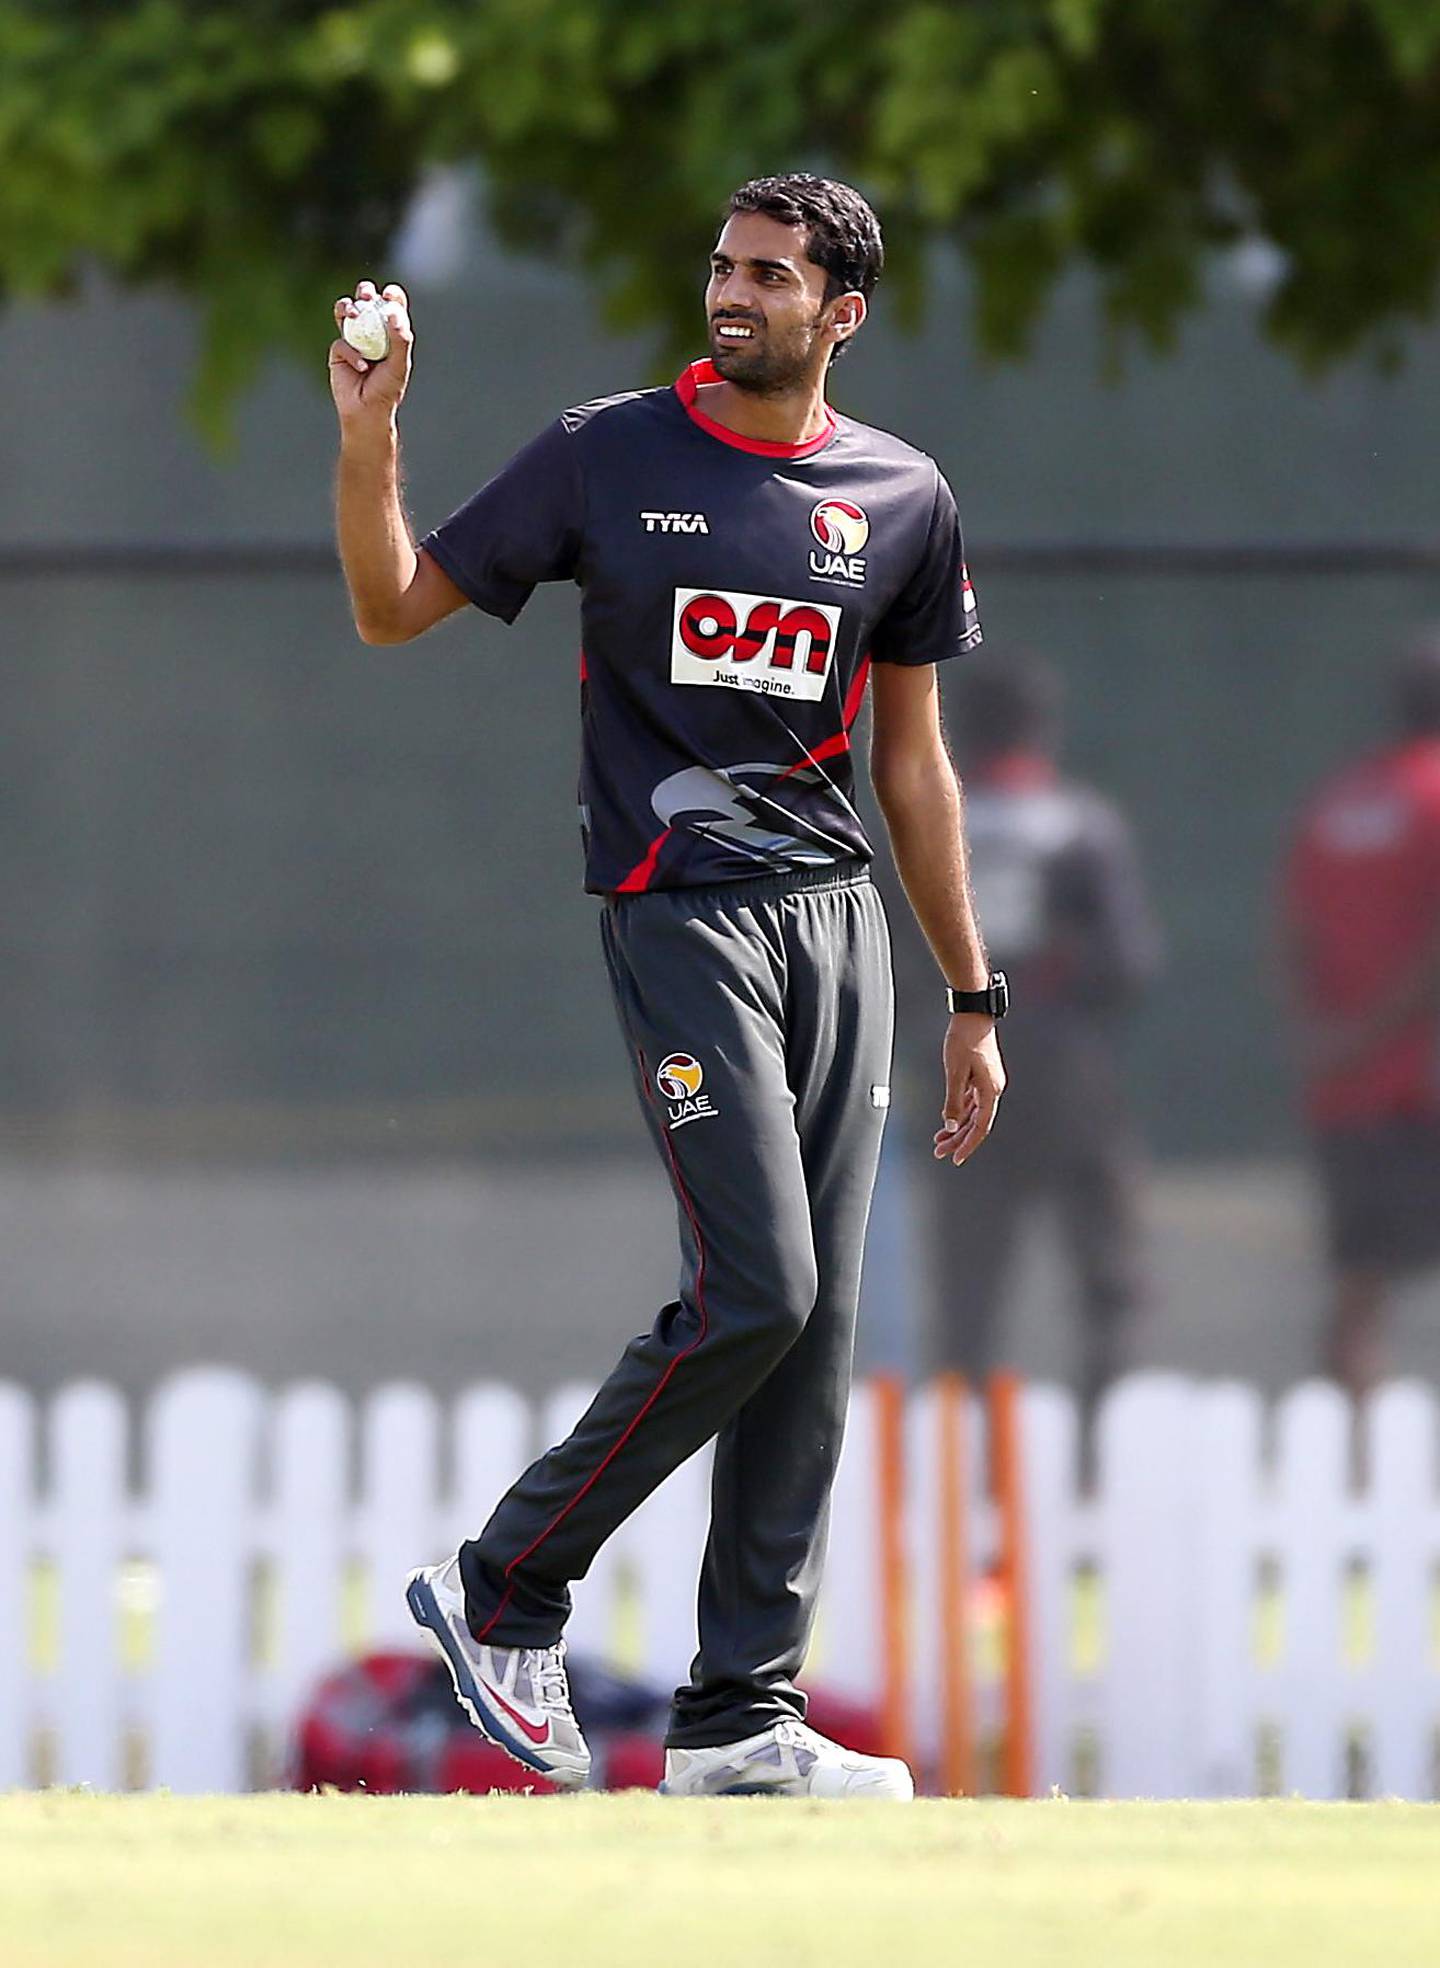 DUBAI , UNITED ARAB EMIRATES – Nov 18 , 2015 : Qadeer Ahmed of UAE playing during the cricket match between UAE vs Hong Kong at ICC Academy Oval at Dubai Sports City in Dubai. ( Pawan Singh / The National ) For Sports Stock. Story by Paul Radley. ID Number : 50851 *** Local Caption ***  PS1811- UAE CRICKET38.jpg